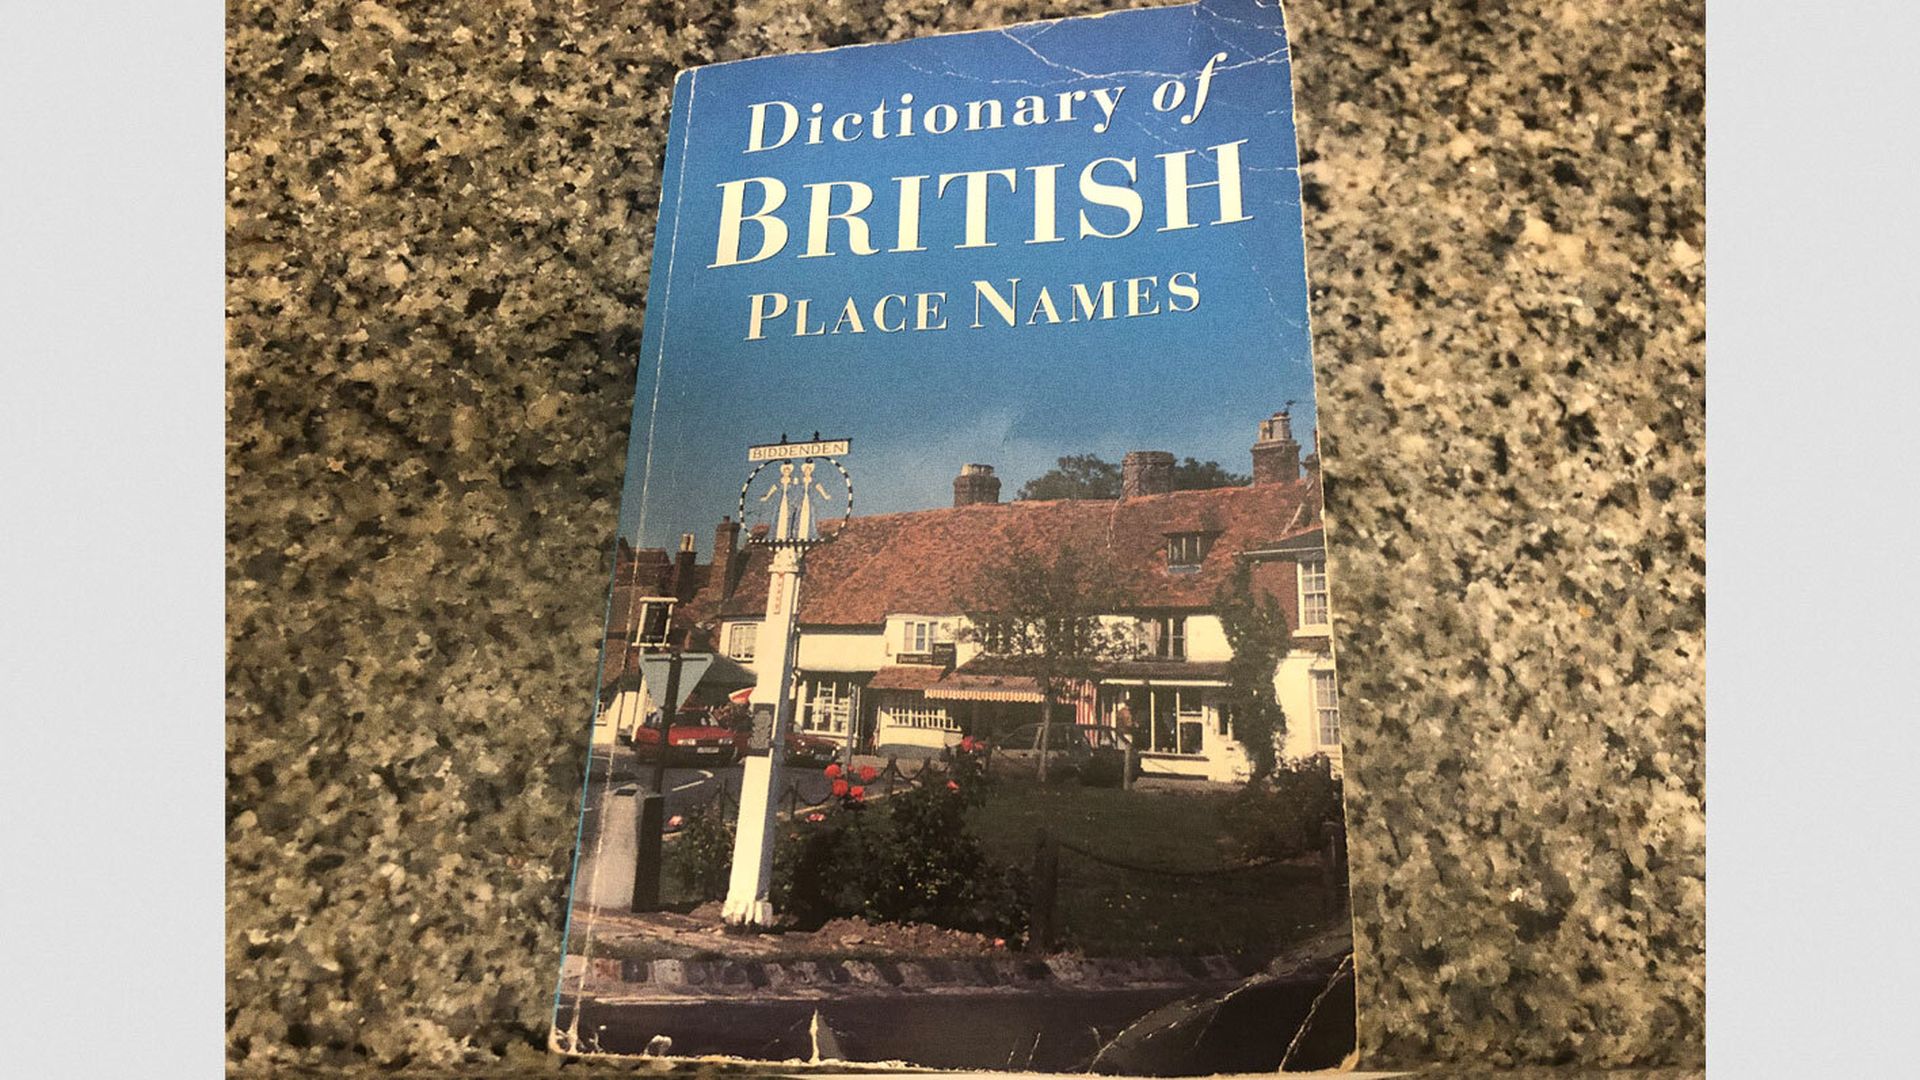 Photo of the book, "Dictionary of British Place Names"